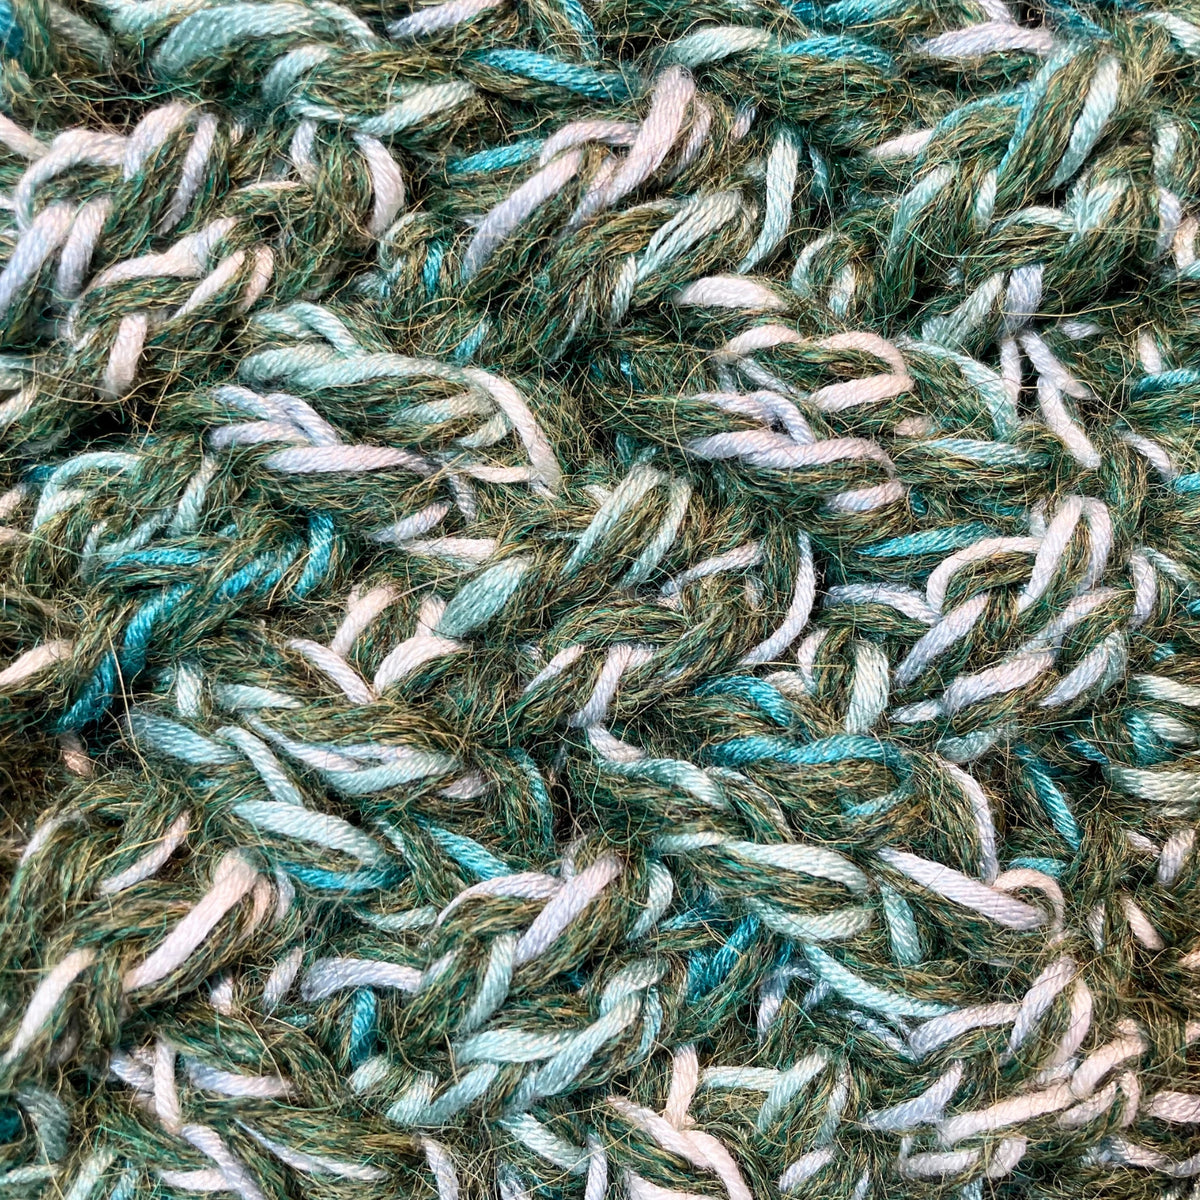 A close up photograph of the warm cozy handmade knit crochet Alpacas of Montana scarf, a mixture of the colors moss green, teal, turquoise, seafoam, and white. 